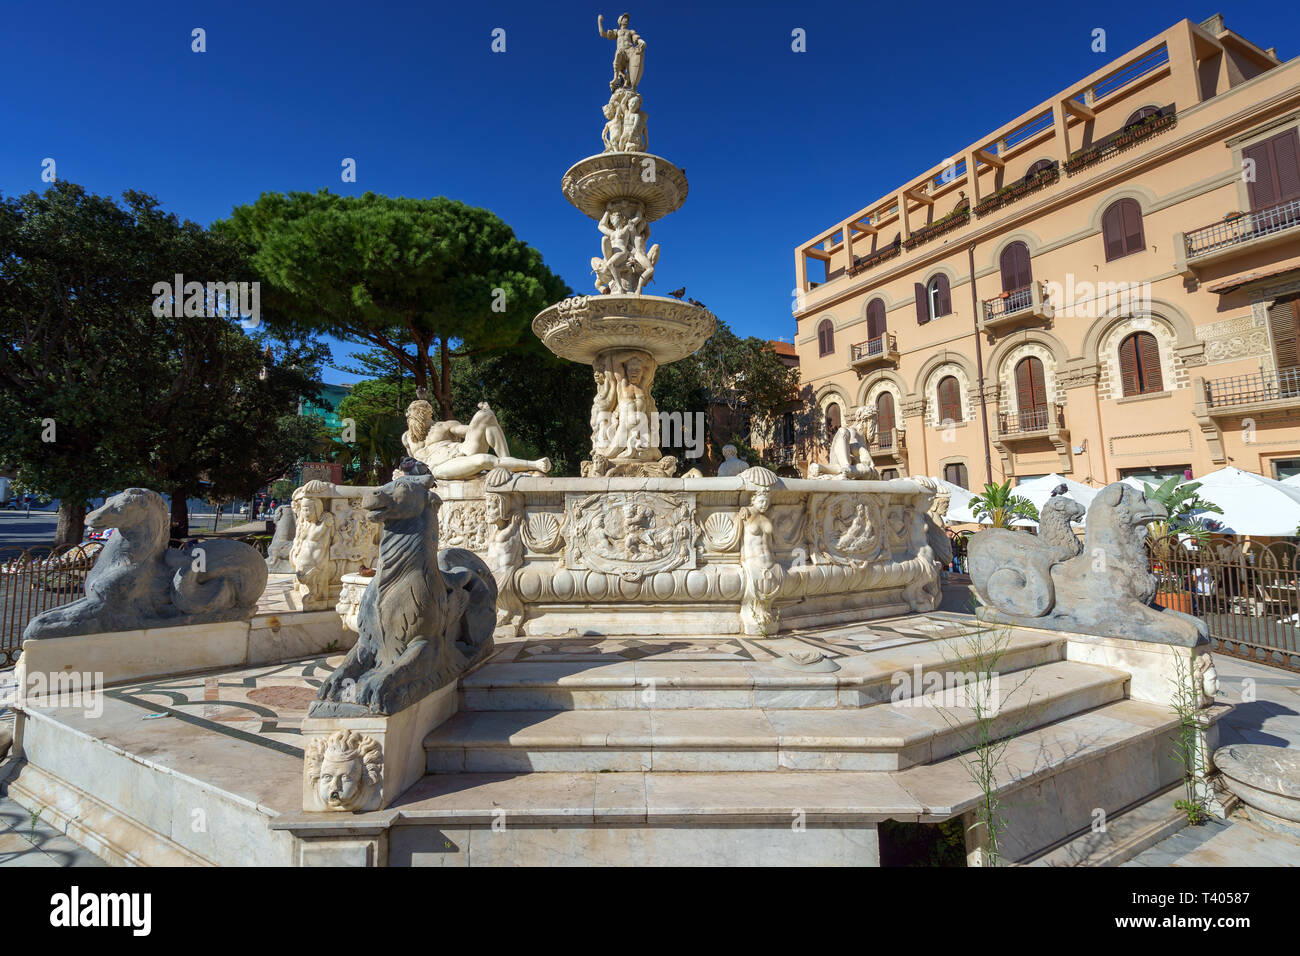 MESSINA, ITALY - NOVEMBER 06, 2018 - Fountain of Orion on Piazza del Duomo  on a sunny autumn day Stock Photo - Alamy